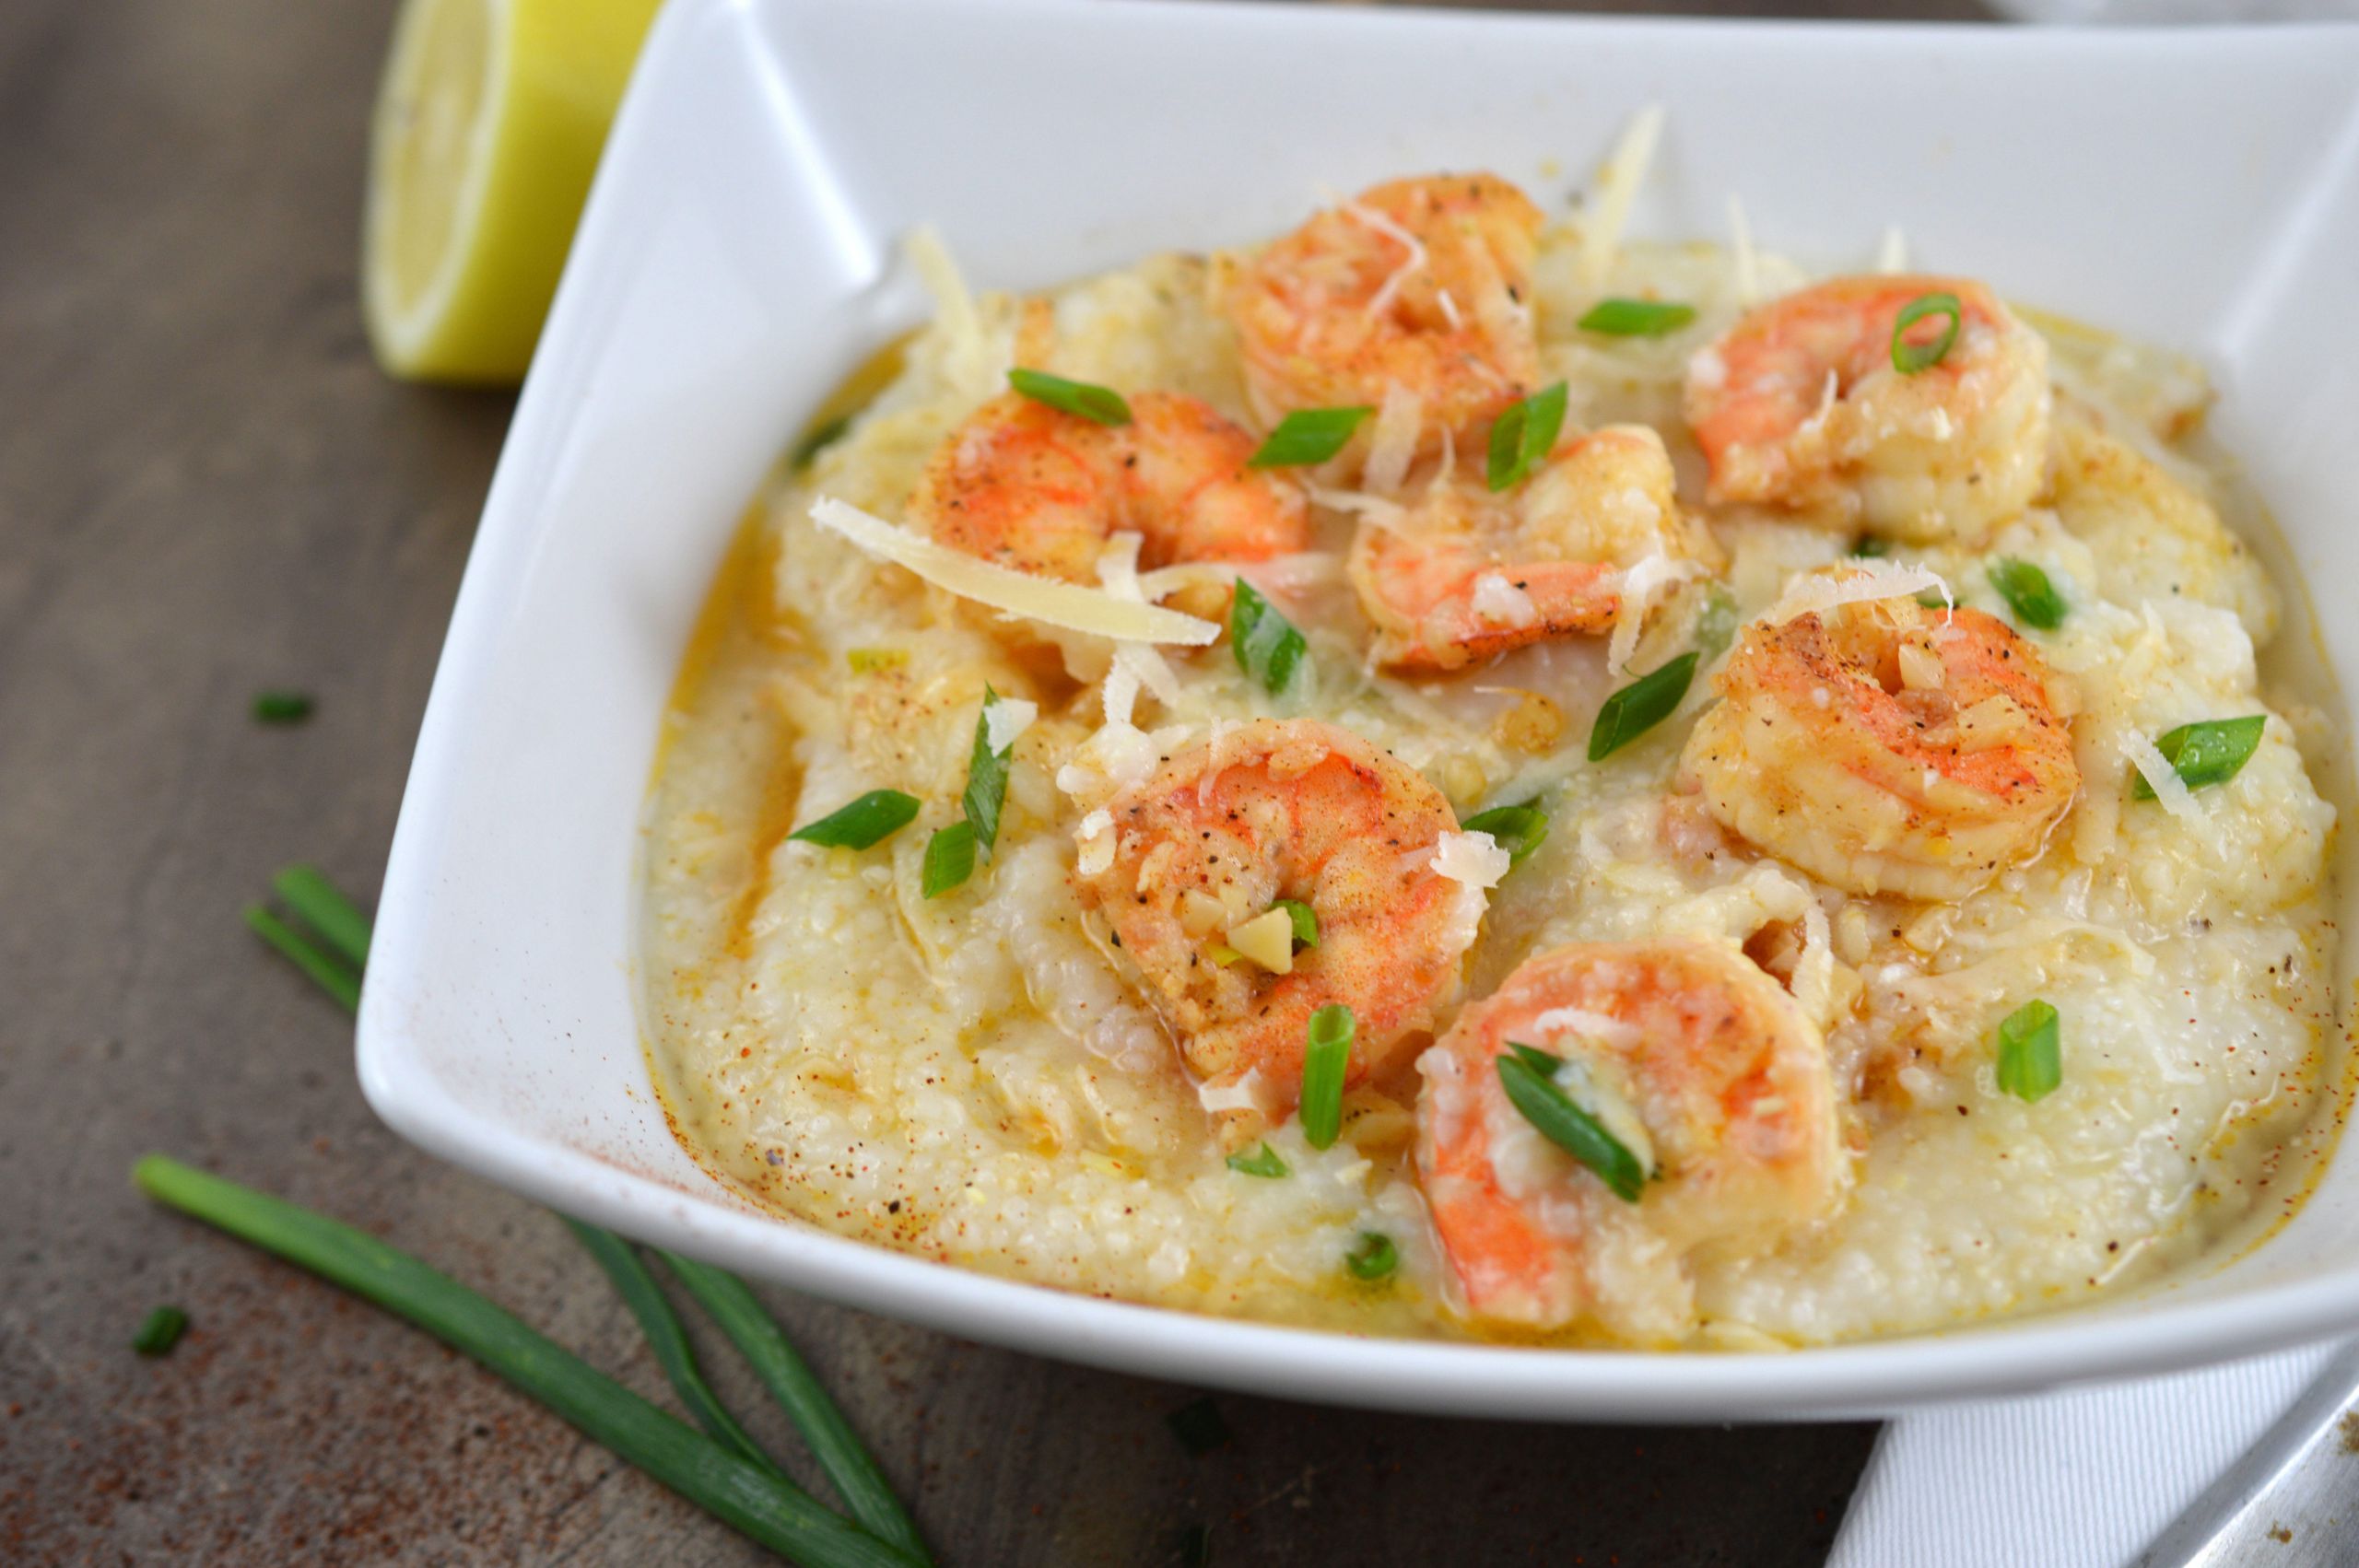 Best Ever Shrimp and Grits Unique Tasty Tuesday S Recipe for the Week the Best Shrimp and Grits